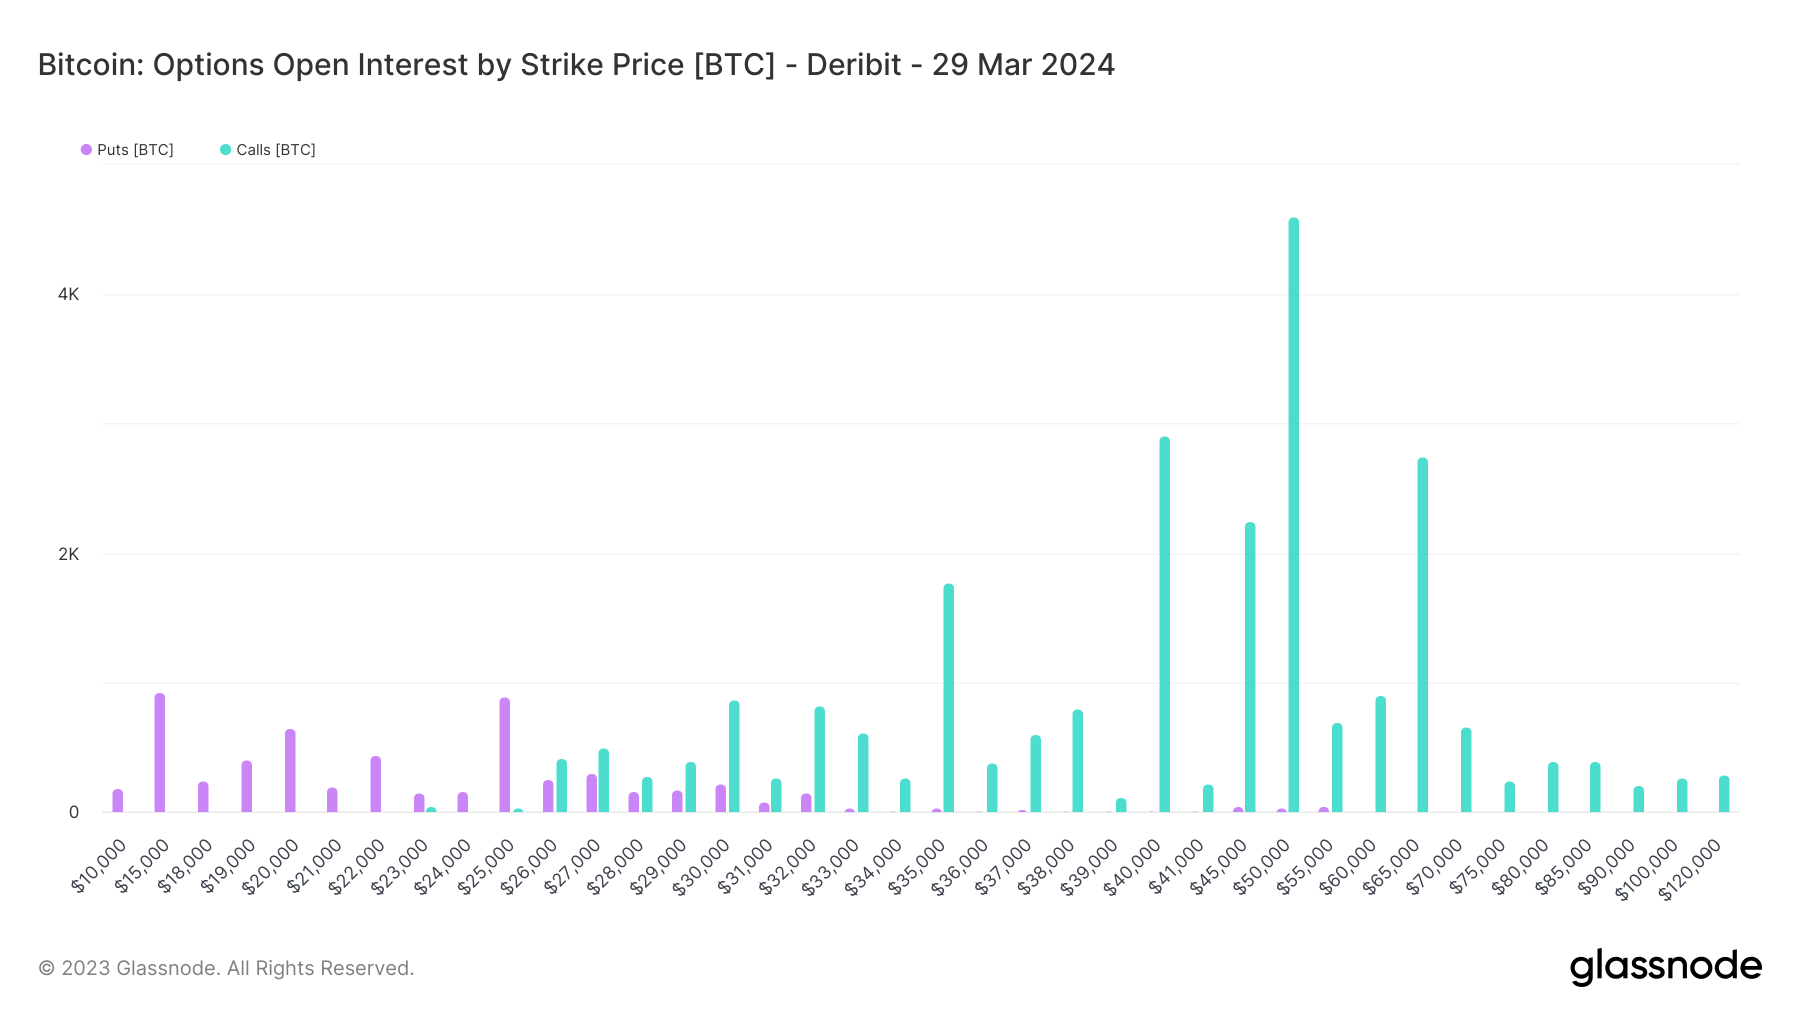 Options Open Interest by strike price - 29th March 2024: (Source: Glassnode)